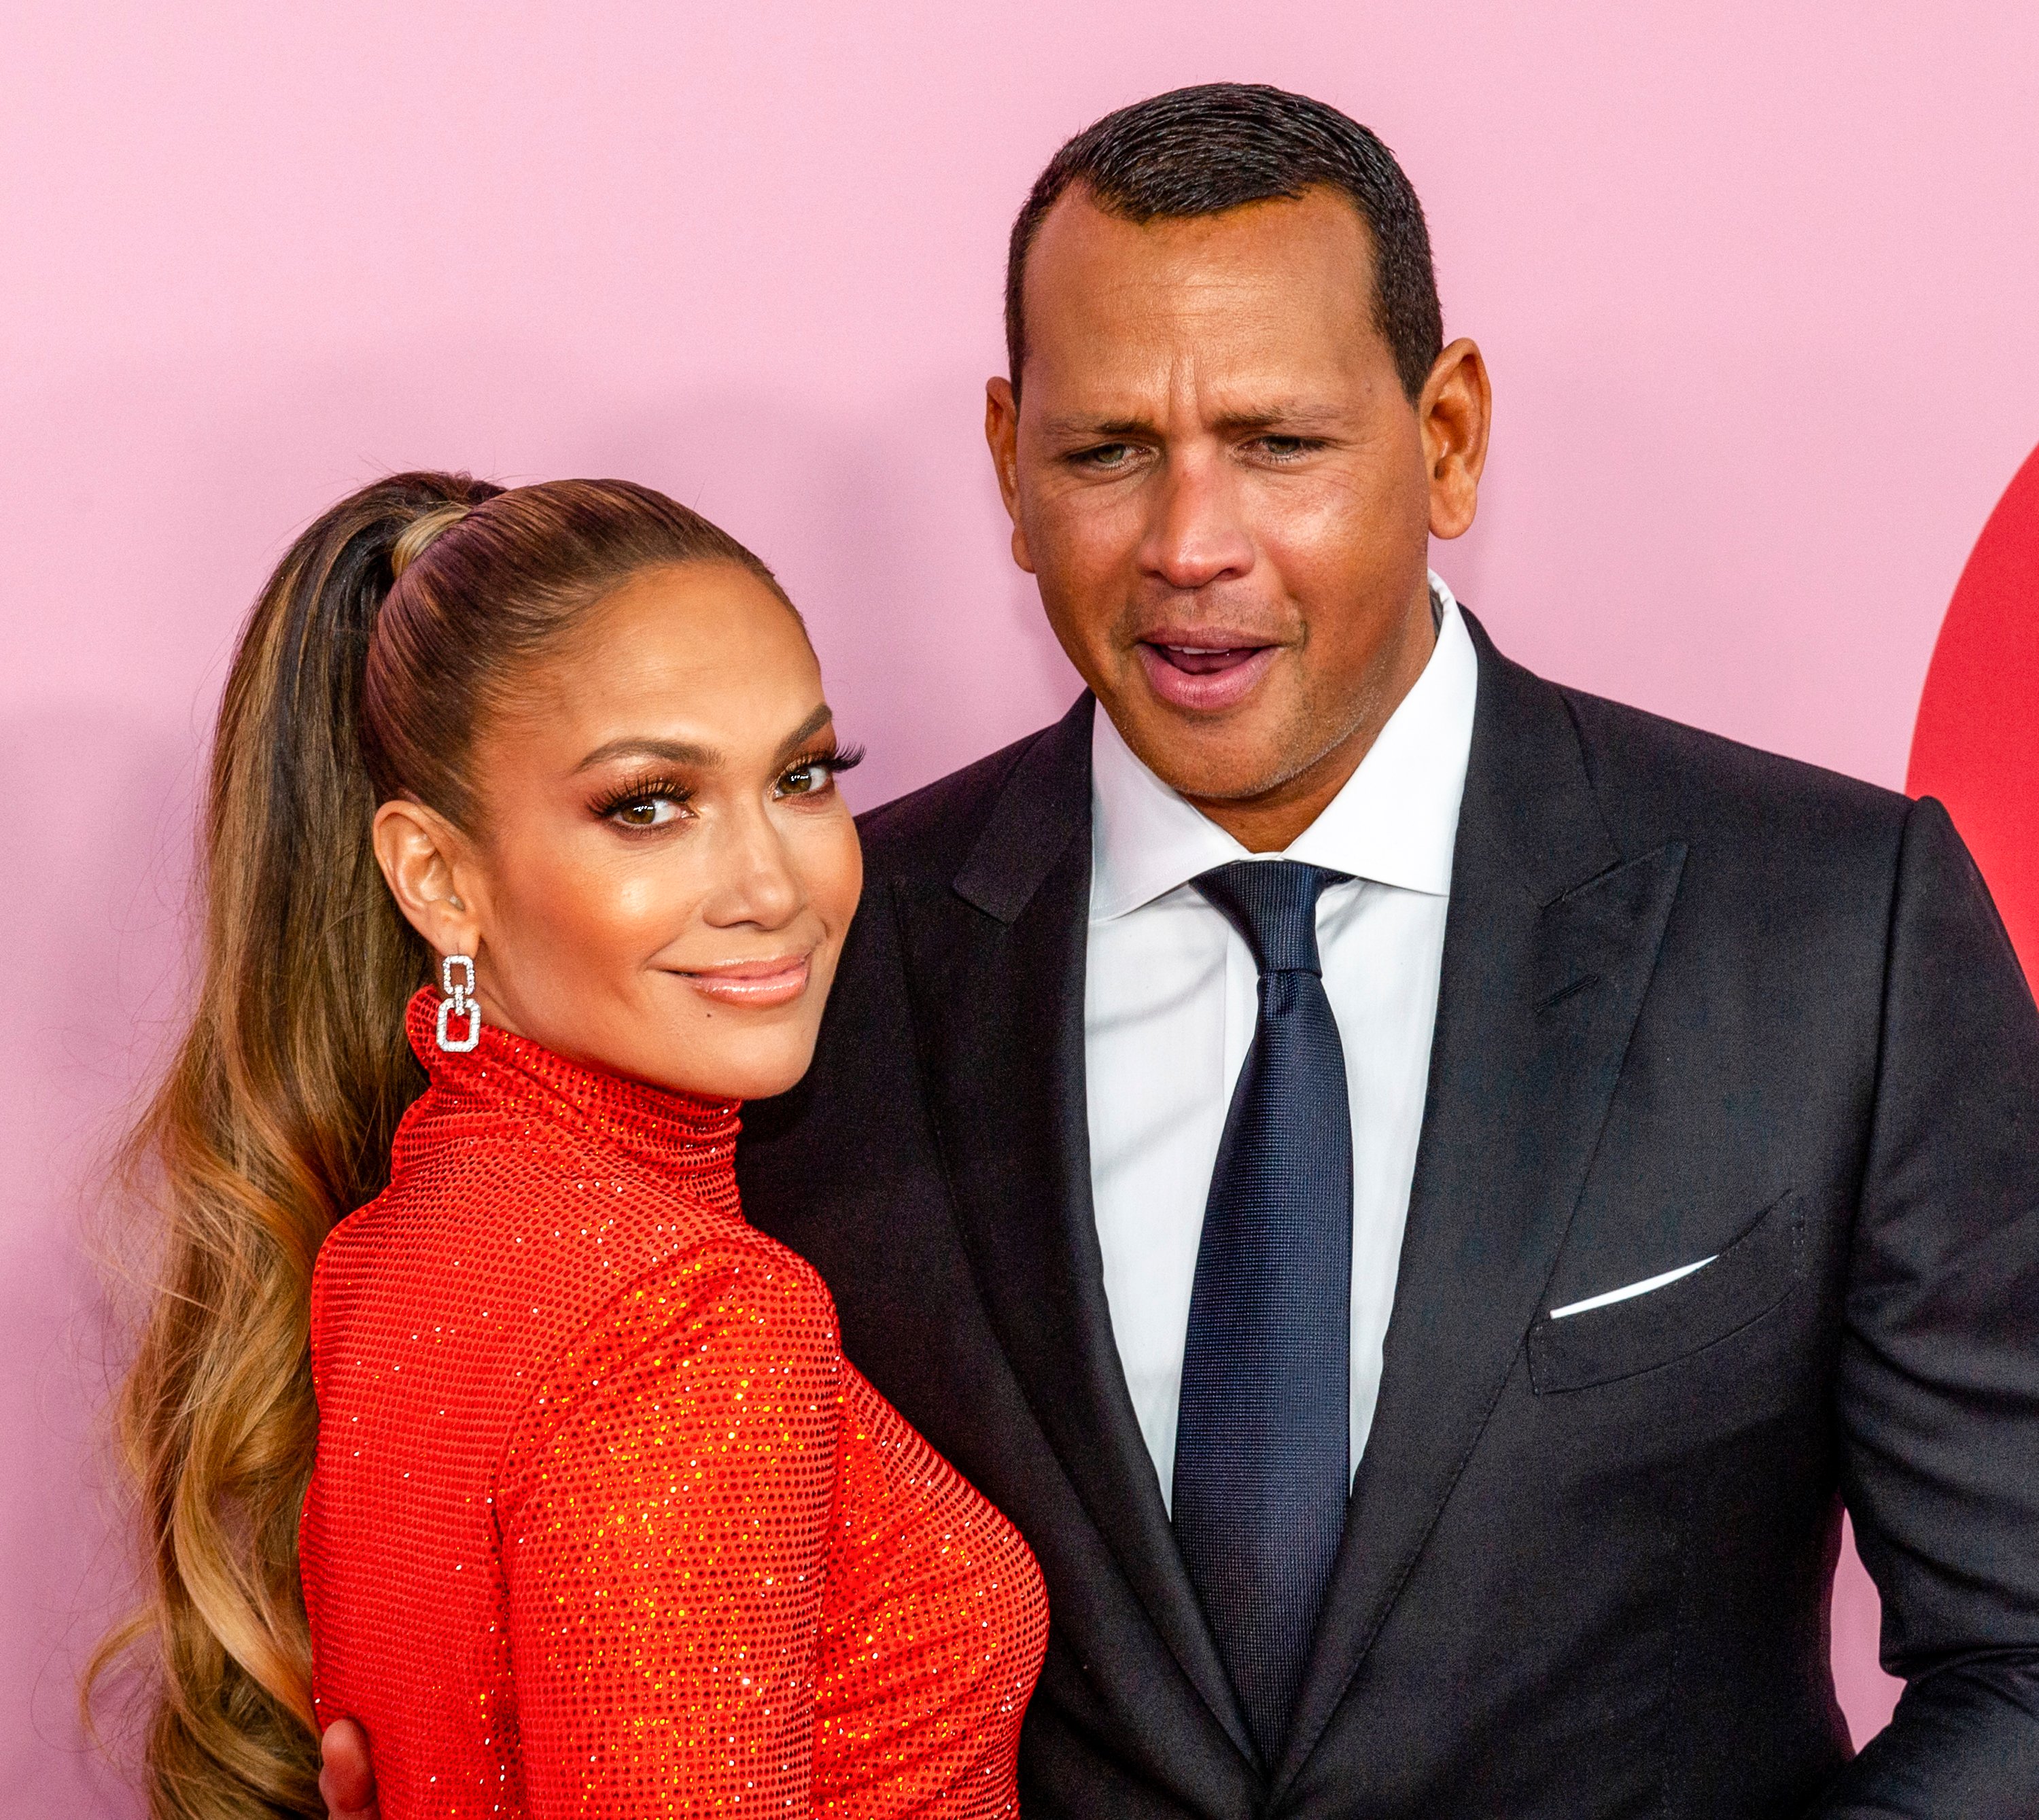 Jennifer Lopez and fiance, Alex Rodriguez at the 2019 CFDA Fashion Awards held at Brooklyn Museum. | Photo: Shutterstock.